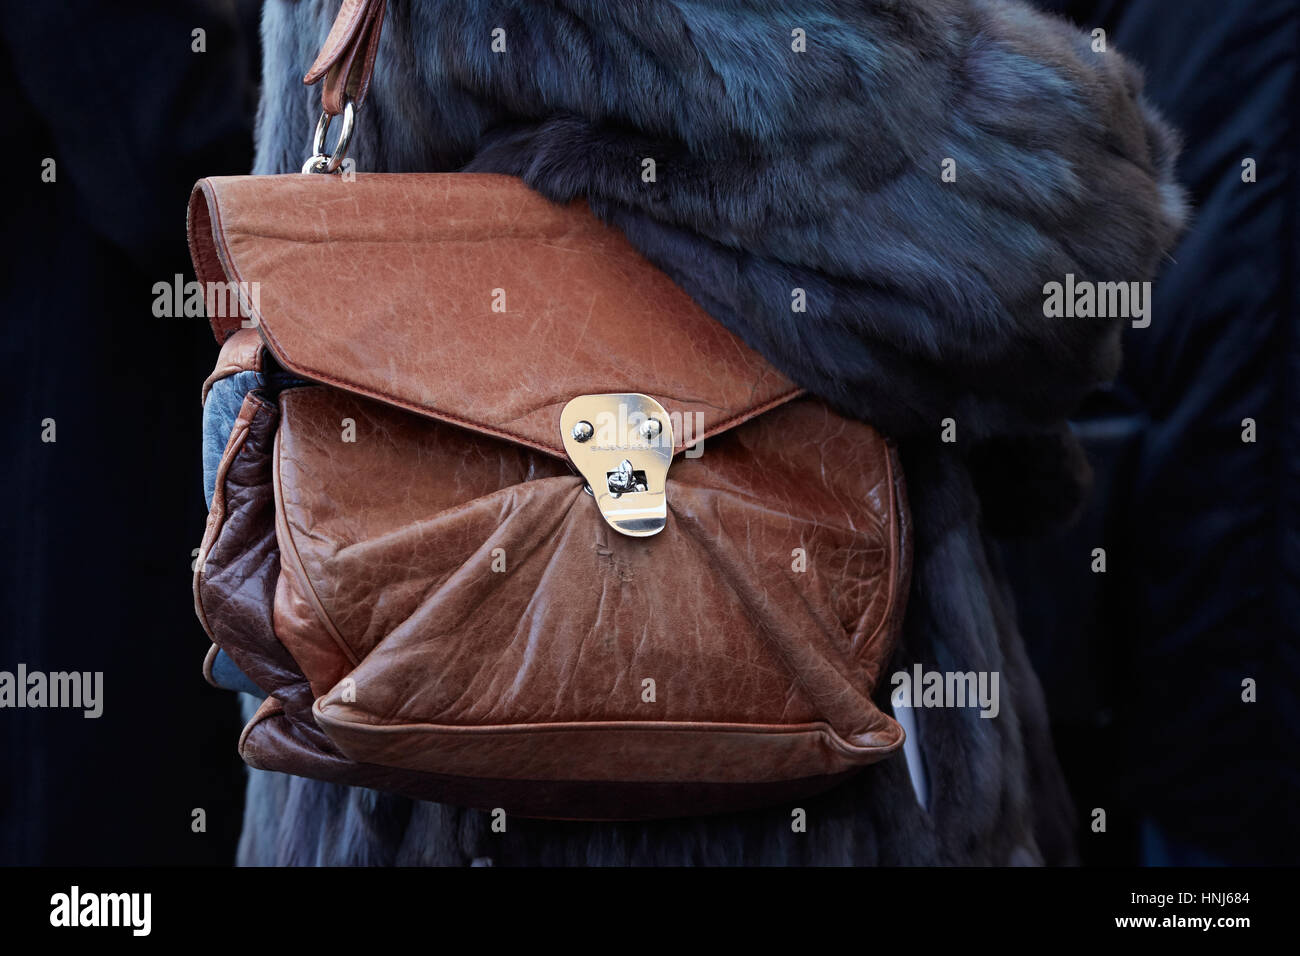 MILAN - JANUARY 16: Woman with Balenciaga brown leather bag and fur coat before Wood Wood fashion show, Milan Fashion Week street style on January 16, Stock Photo